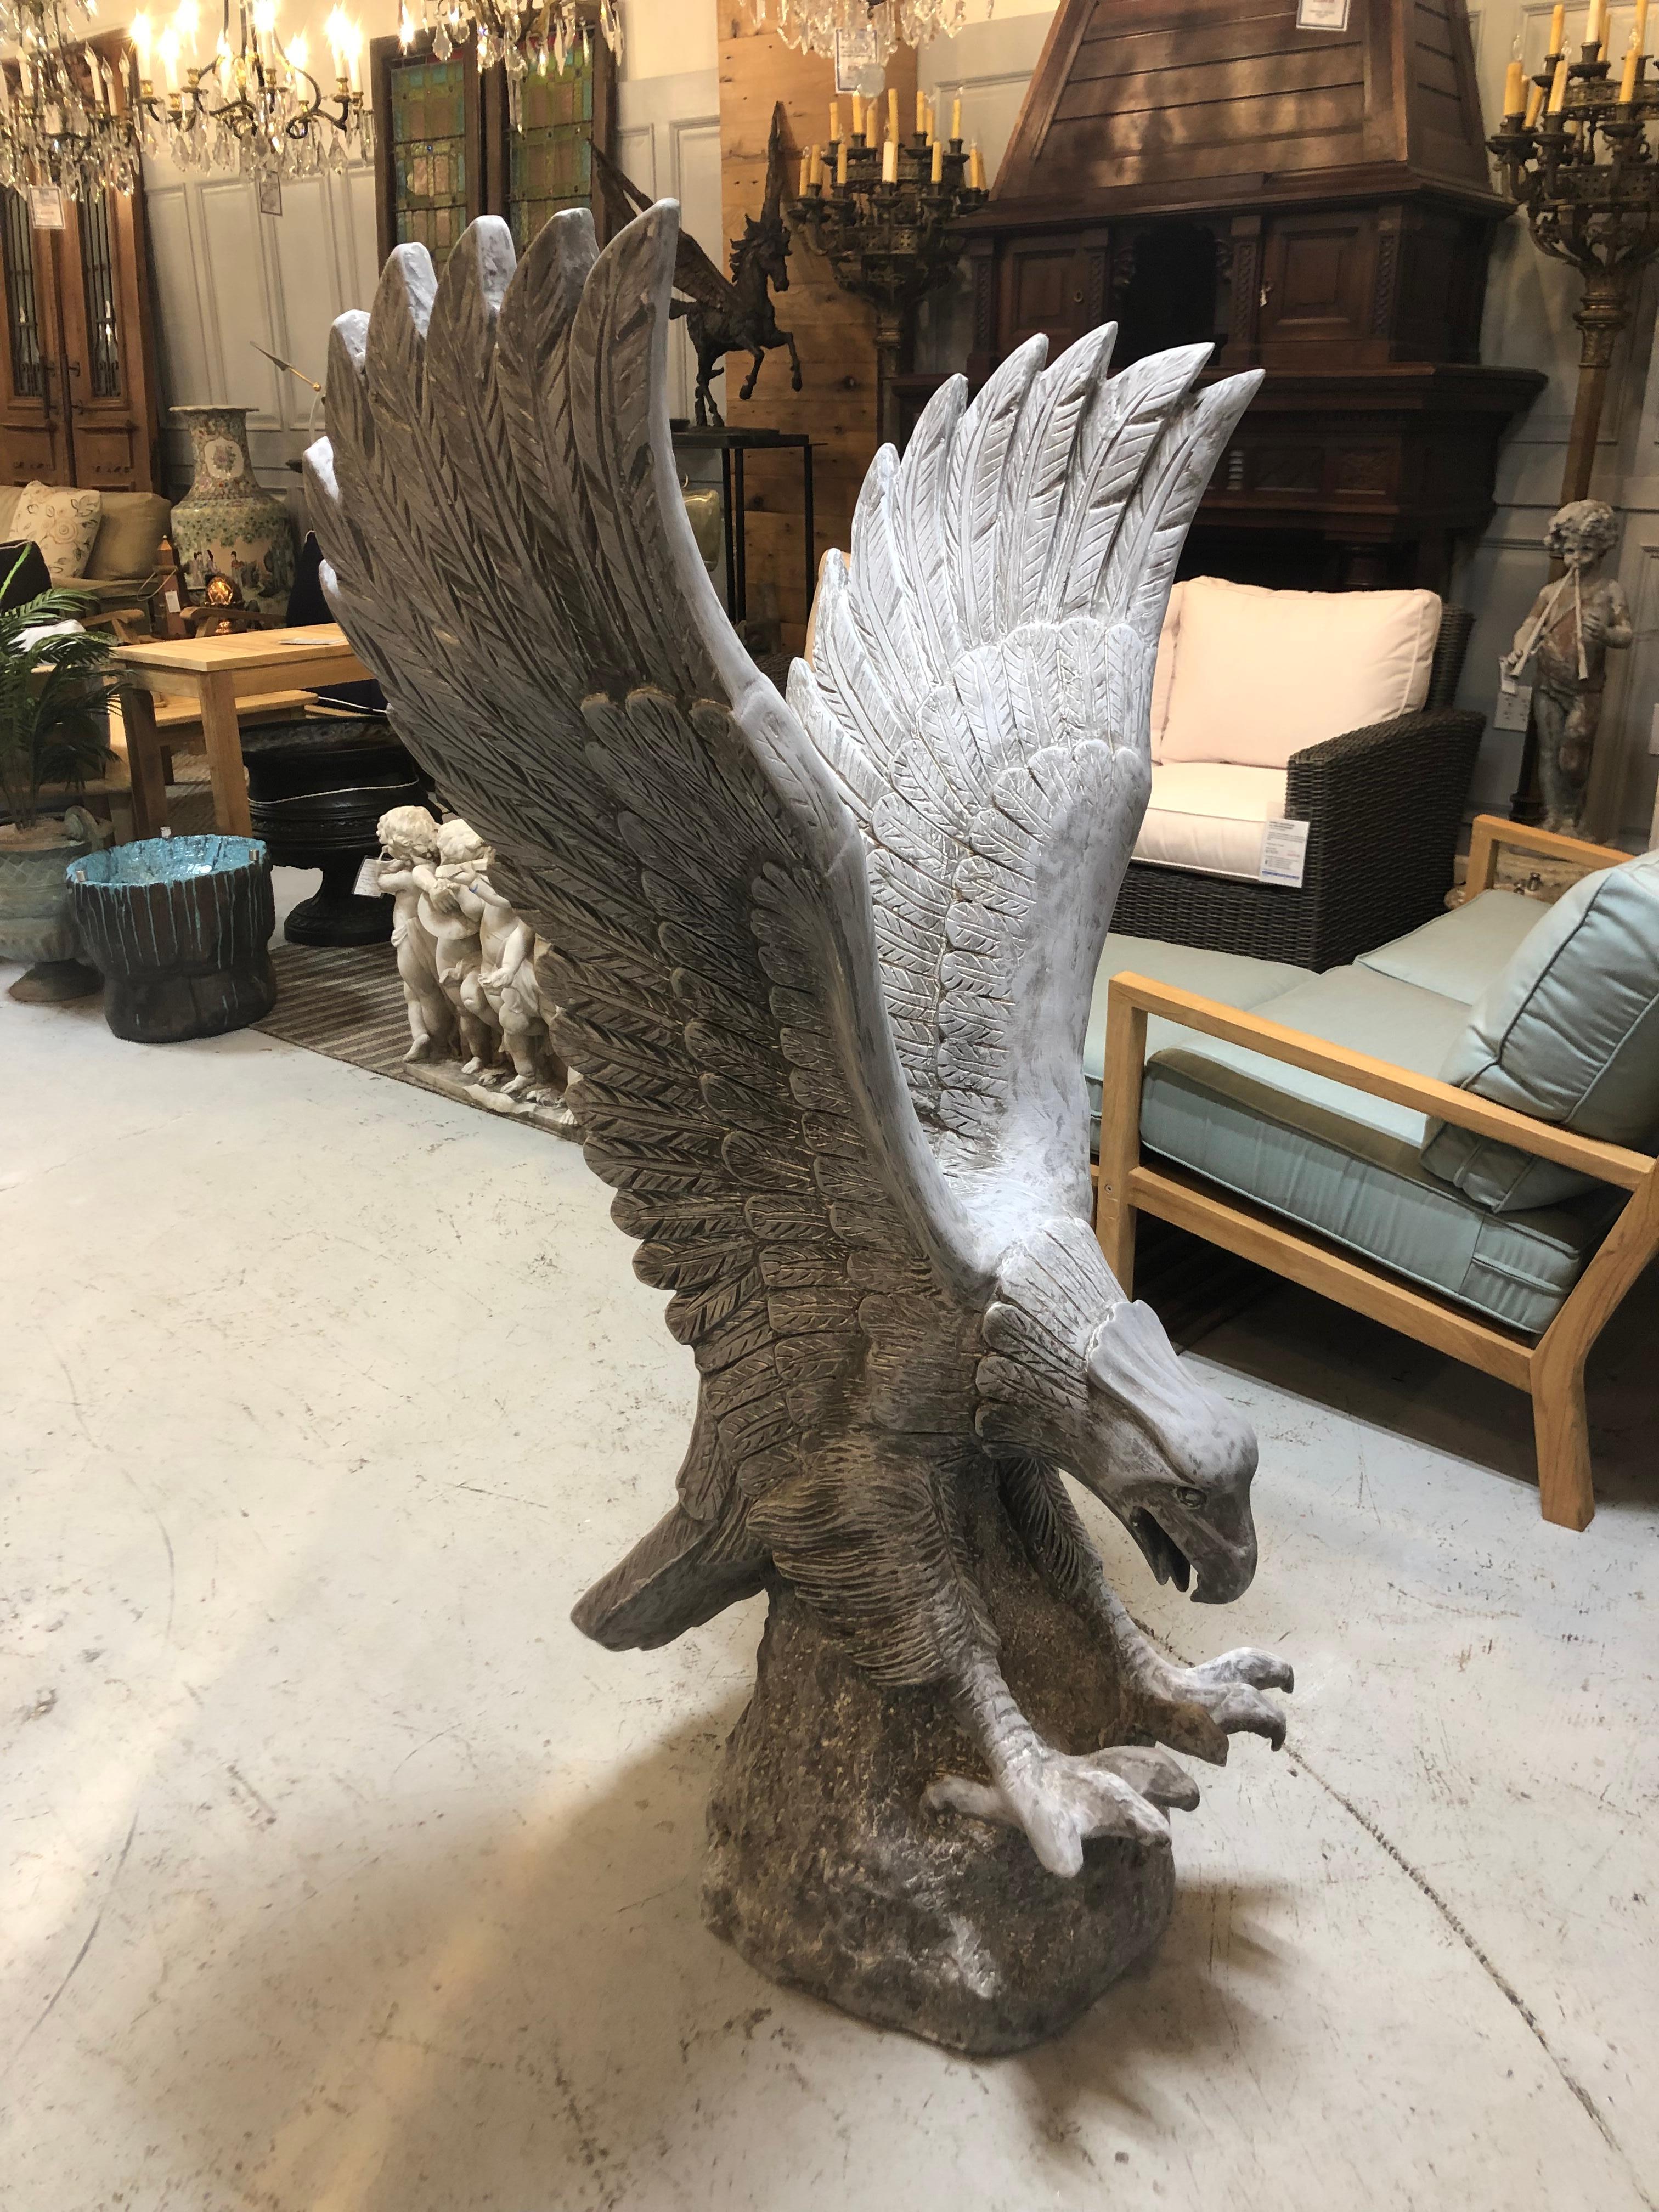 Large Fiberglass American Eagle with Open Talons ready to ponce on its prey. Nothing shows more strength than an American Eagle with its talons open. A pair of eagles would look amazing at the end of a driveway entrance standing alone or on pillars